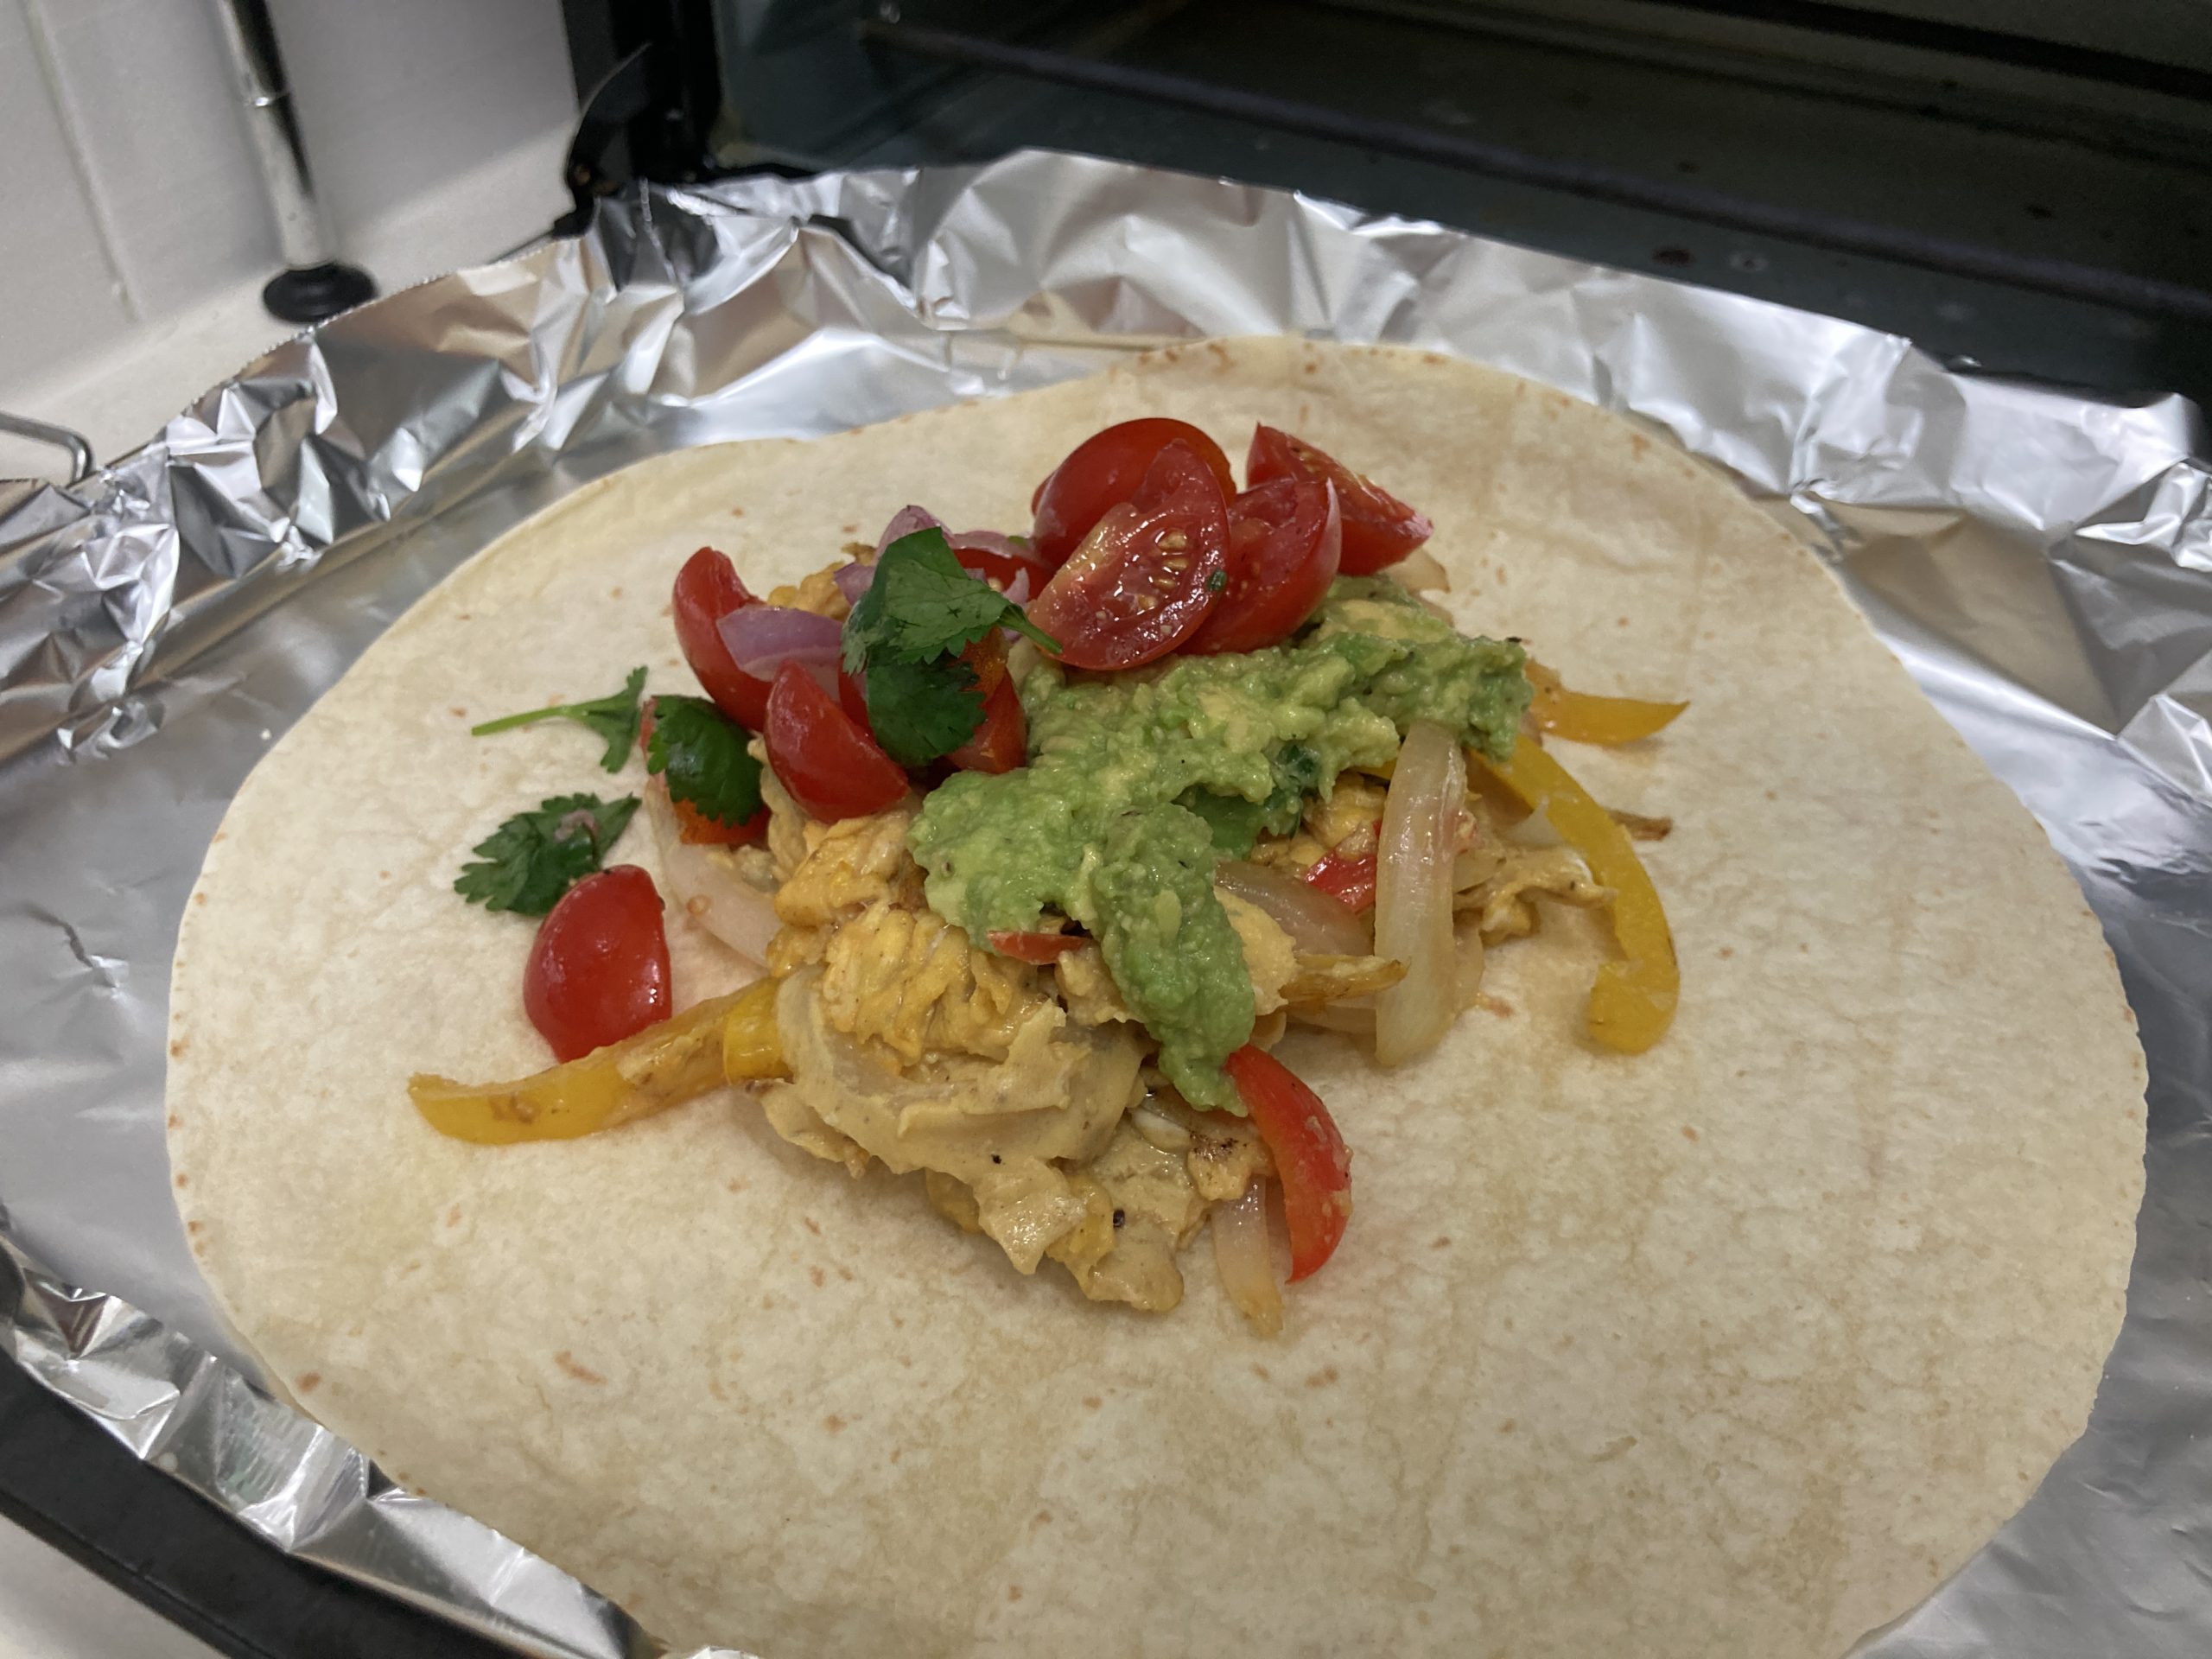 Breakfast burritos, and a lesson learned